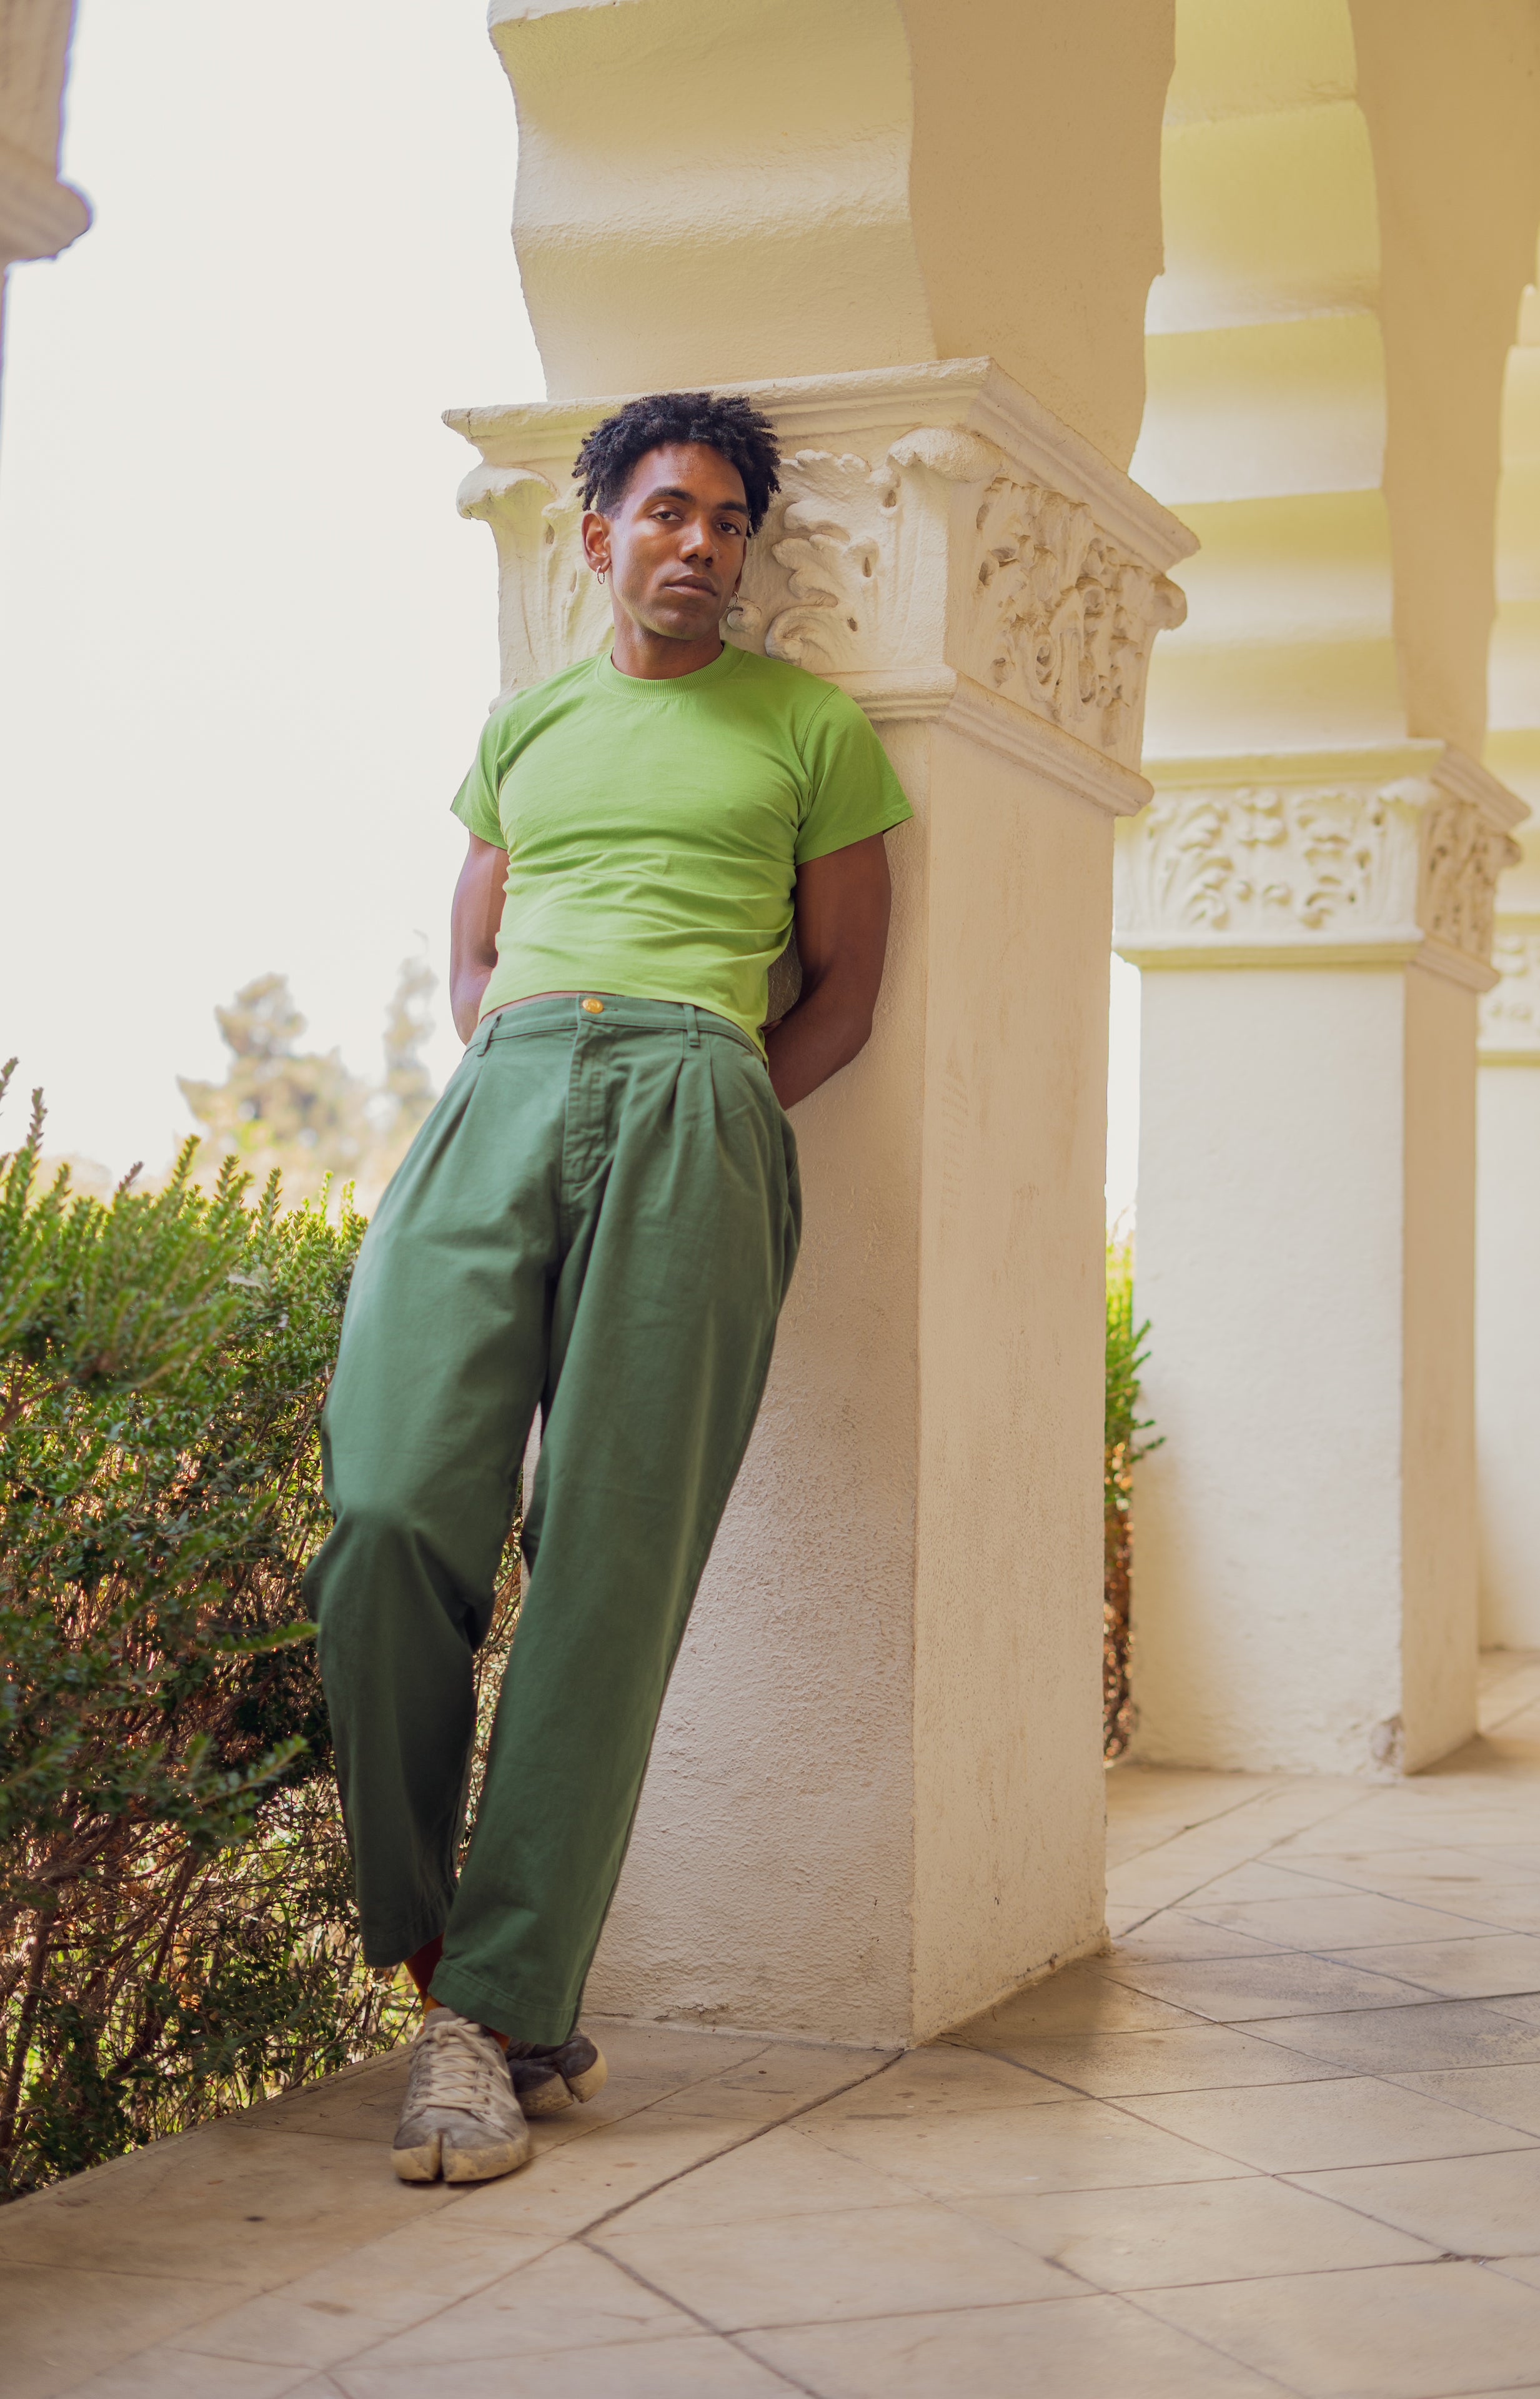 Jerrod wearing Organic Vintage Tee in Bright Olive and Heavyweight Trousers in Dark Emerald Green